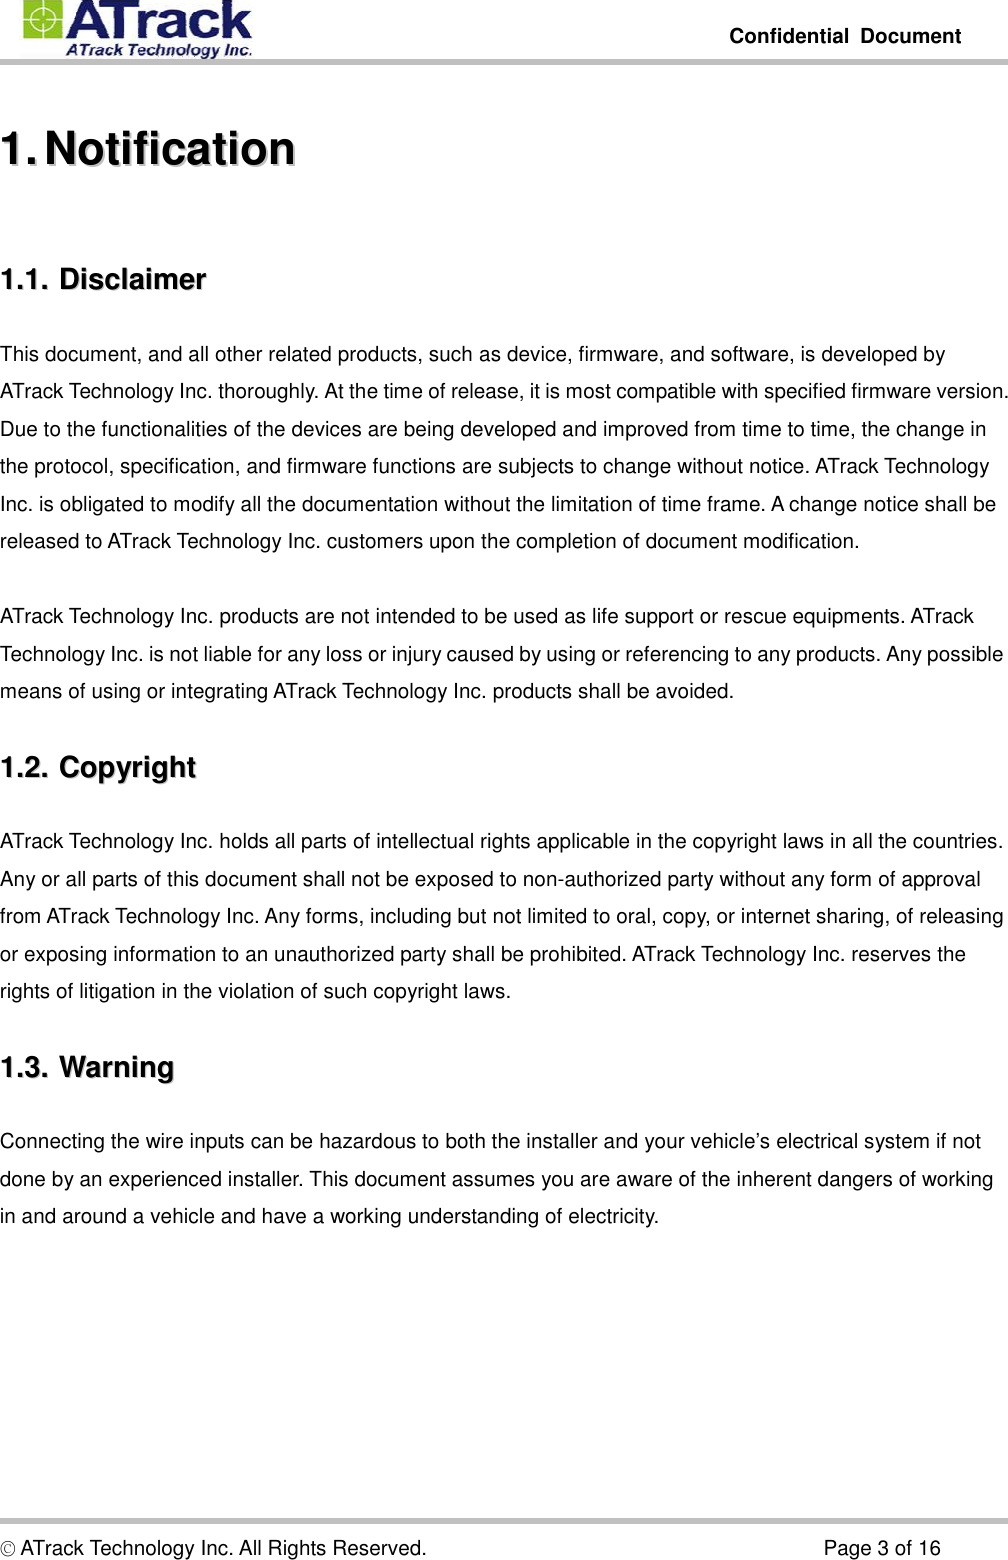         Confidential  Document  © ATrack Technology Inc. All Rights Reserved.                                                                            Page 3 of 16 11..  NNoottiiffiiccaattiioonn  11..11..  DDiissccllaaiimmeerr  This document, and all other related products, such as device, firmware, and software, is developed by ATrack Technology Inc. thoroughly. At the time of release, it is most compatible with specified firmware version. Due to the functionalities of the devices are being developed and improved from time to time, the change in the protocol, specification, and firmware functions are subjects to change without notice. ATrack Technology Inc. is obligated to modify all the documentation without the limitation of time frame. A change notice shall be released to ATrack Technology Inc. customers upon the completion of document modification.  ATrack Technology Inc. products are not intended to be used as life support or rescue equipments. ATrack Technology Inc. is not liable for any loss or injury caused by using or referencing to any products. Any possible means of using or integrating ATrack Technology Inc. products shall be avoided. 11..22..  CCooppyyrriigghhtt  ATrack Technology Inc. holds all parts of intellectual rights applicable in the copyright laws in all the countries. Any or all parts of this document shall not be exposed to non-authorized party without any form of approval from ATrack Technology Inc. Any forms, including but not limited to oral, copy, or internet sharing, of releasing or exposing information to an unauthorized party shall be prohibited. ATrack Technology Inc. reserves the rights of litigation in the violation of such copyright laws. 11..33..  WWaarrnniinngg  Connecting the wire inputs can be hazardous to both the installer and your vehicle’s electrical system if not done by an experienced installer. This document assumes you are aware of the inherent dangers of working in and around a vehicle and have a working understanding of electricity. 